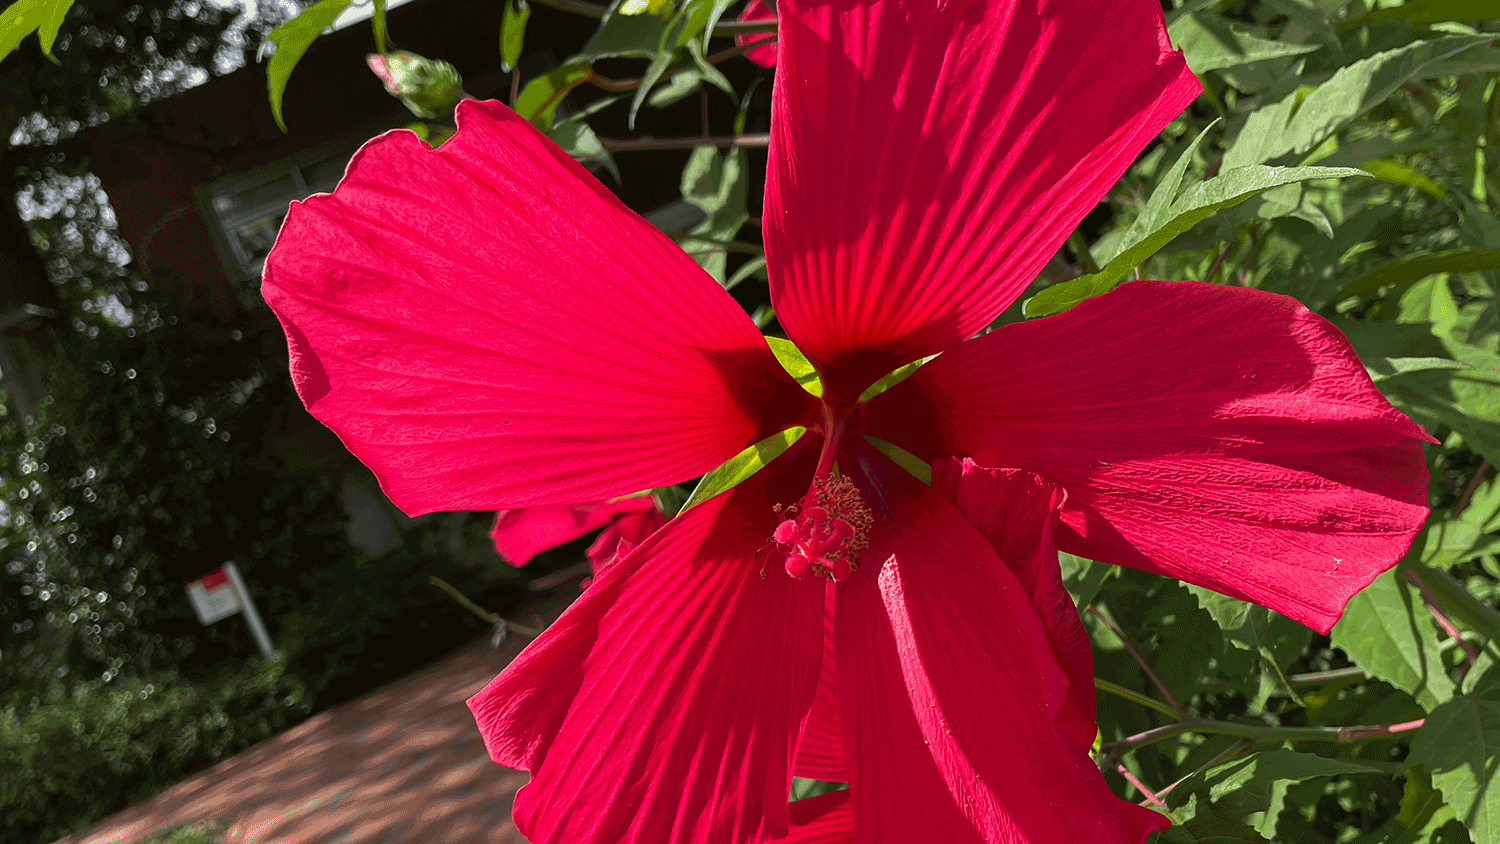 a close up photo of a Hibiscus flower